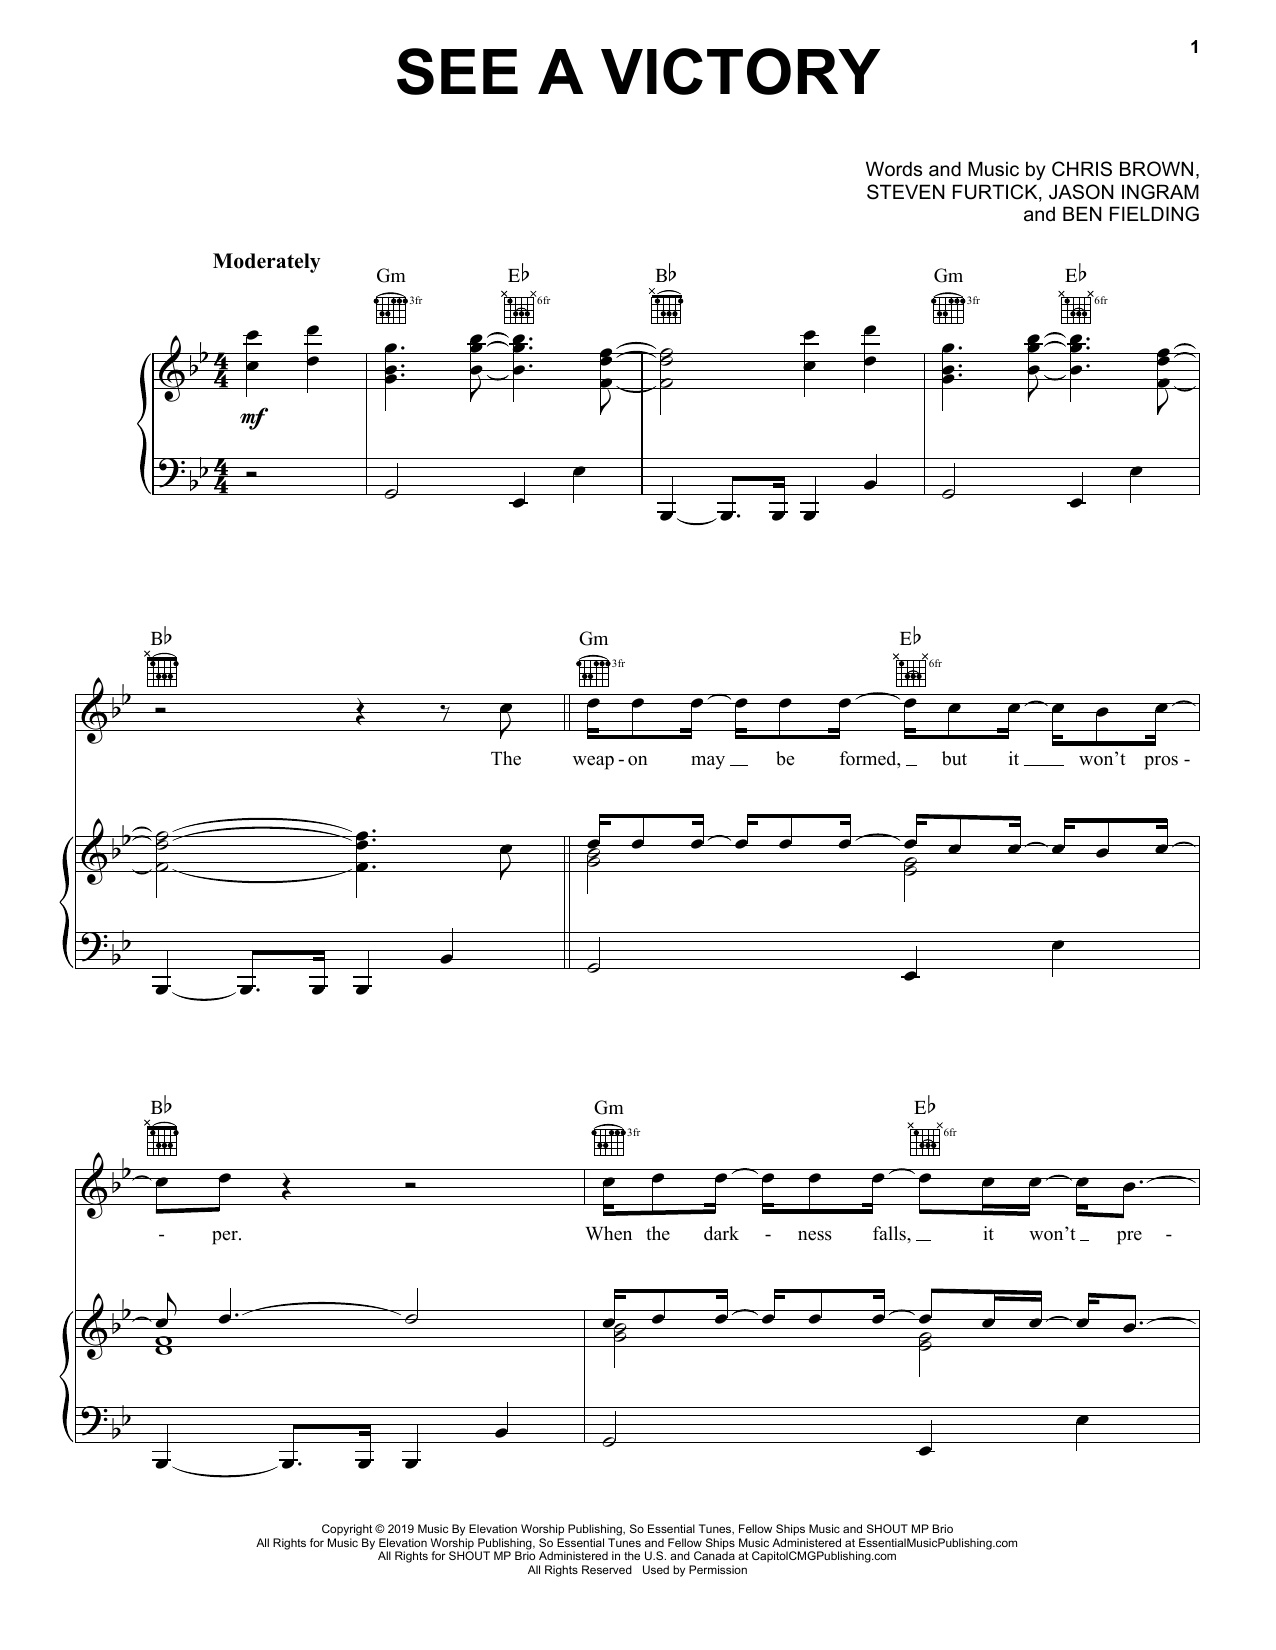 Elevation Worship See A Victory sheet music notes and chords. Download Printable PDF.